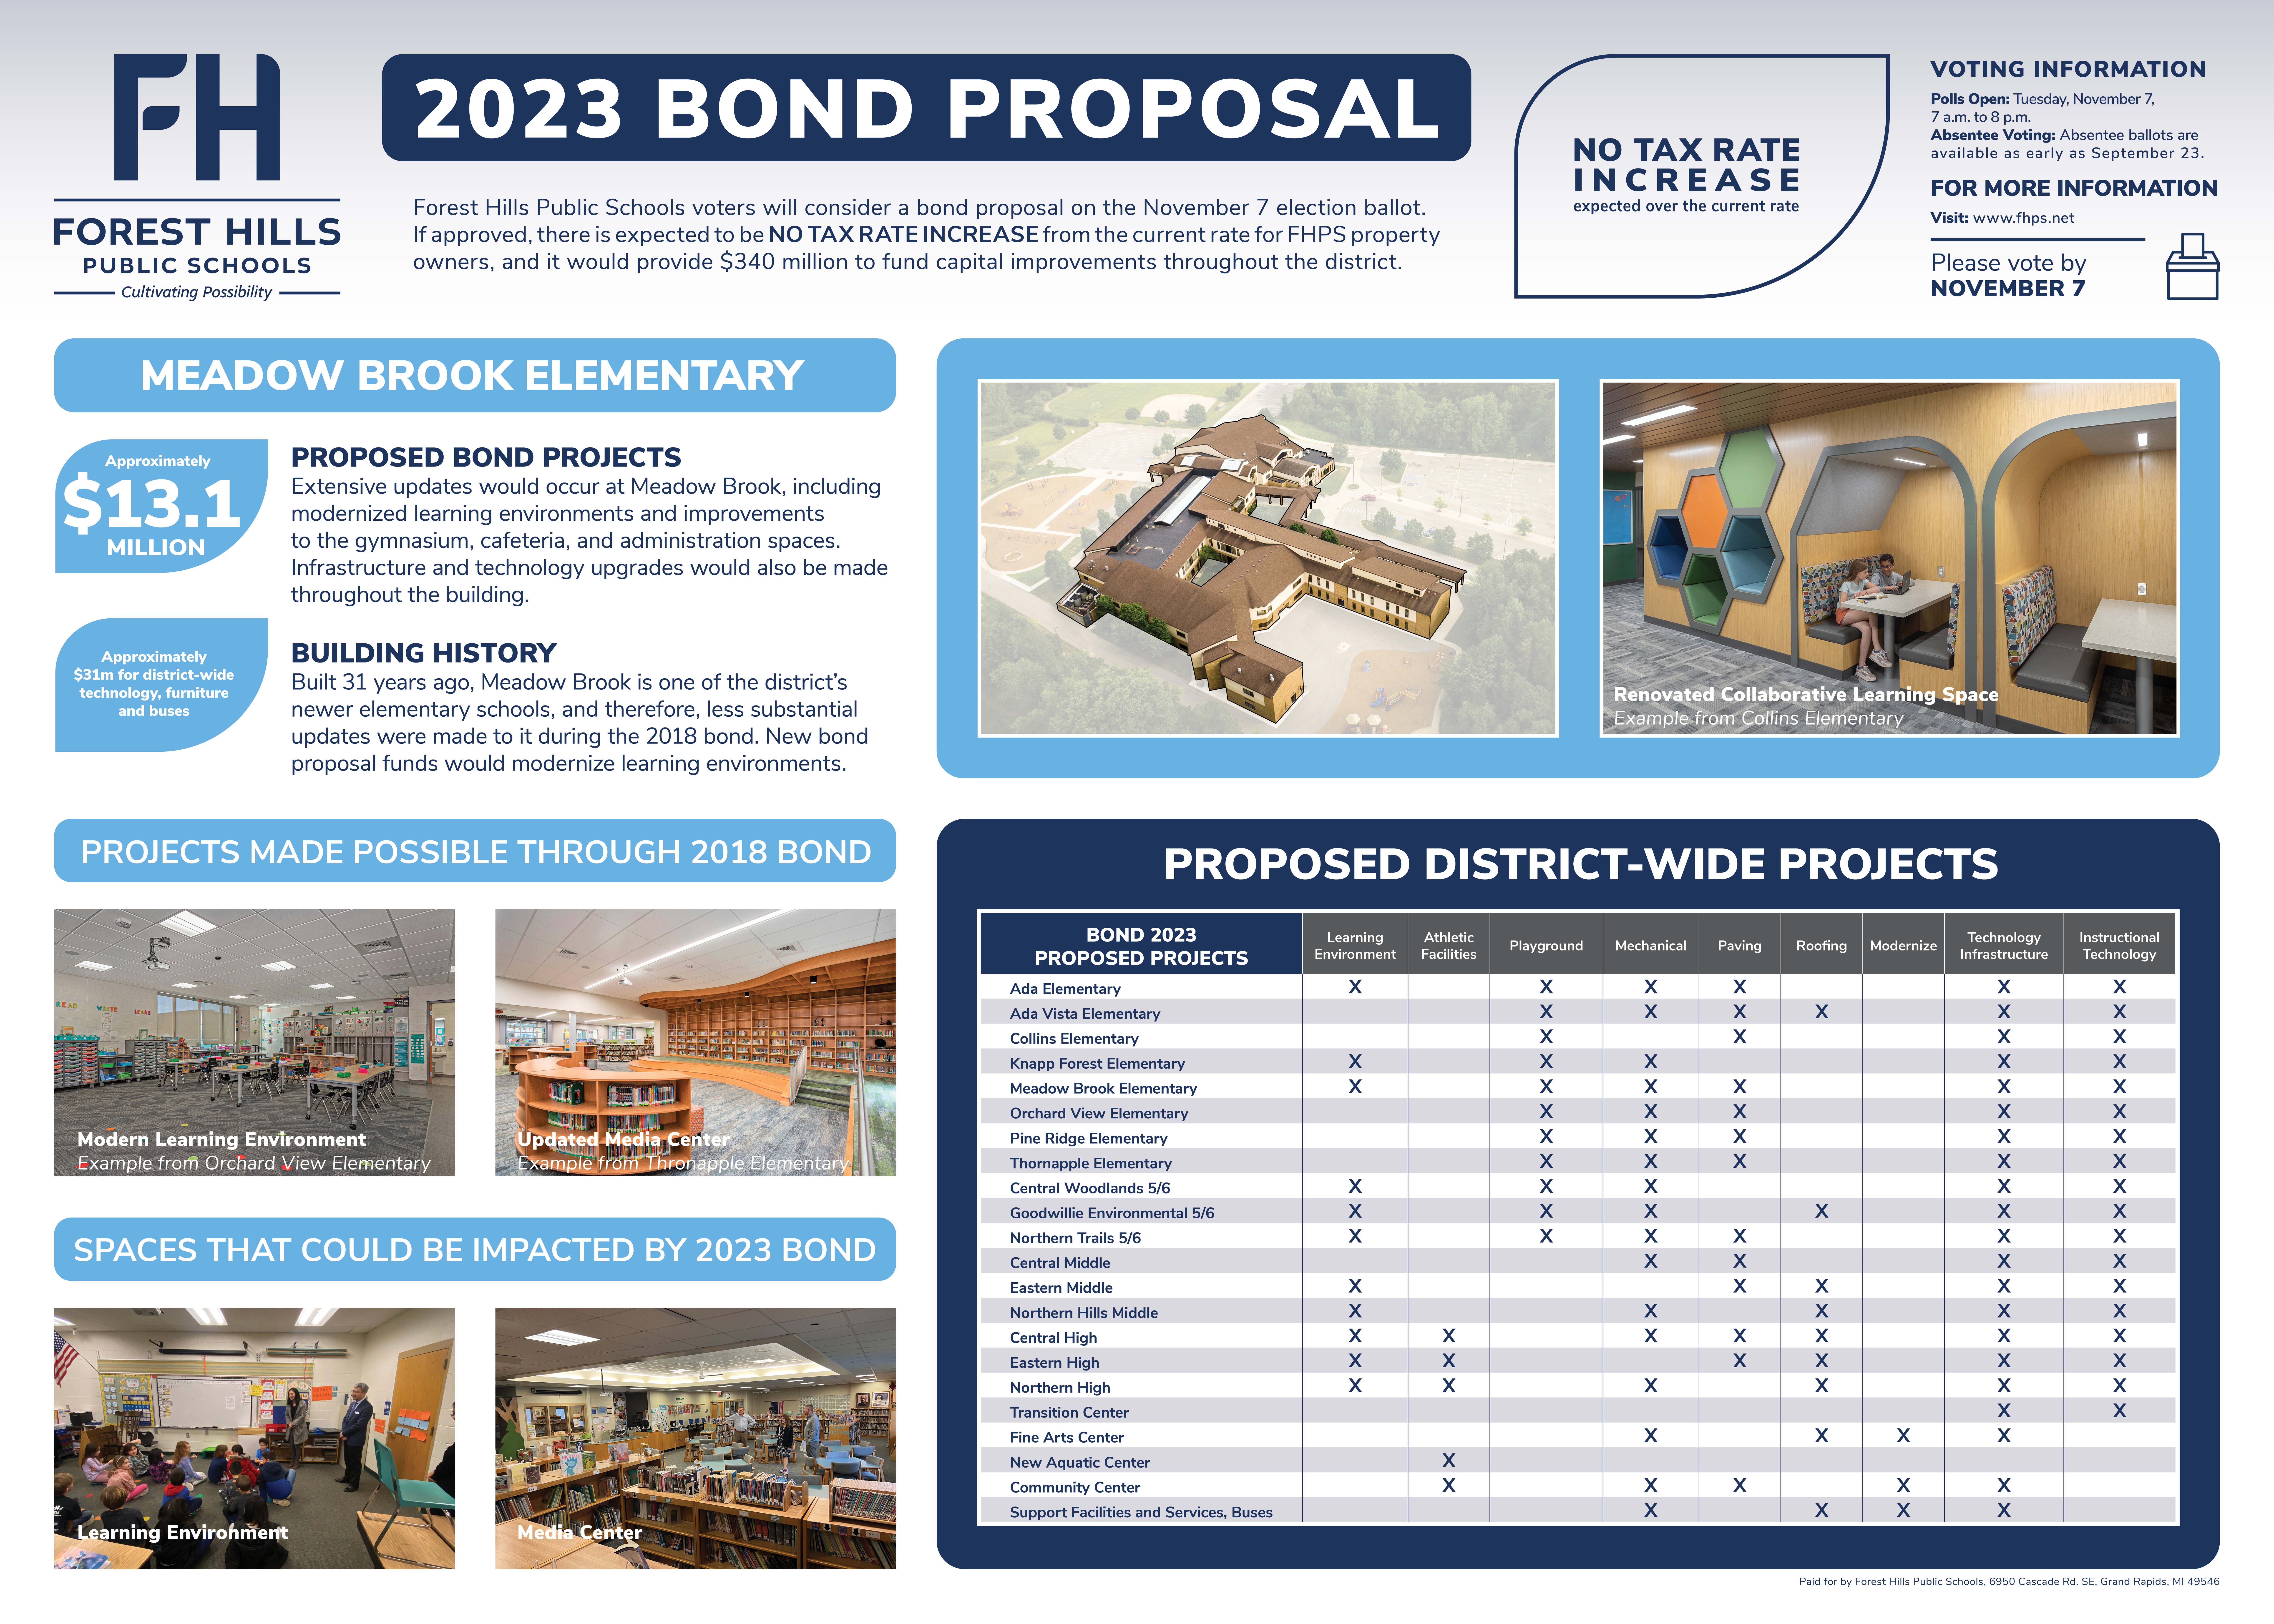 Meadow Brook and pictures of the existing building and bond project pictures from 2018 and spaces that could be impacted by the 2023 bond.